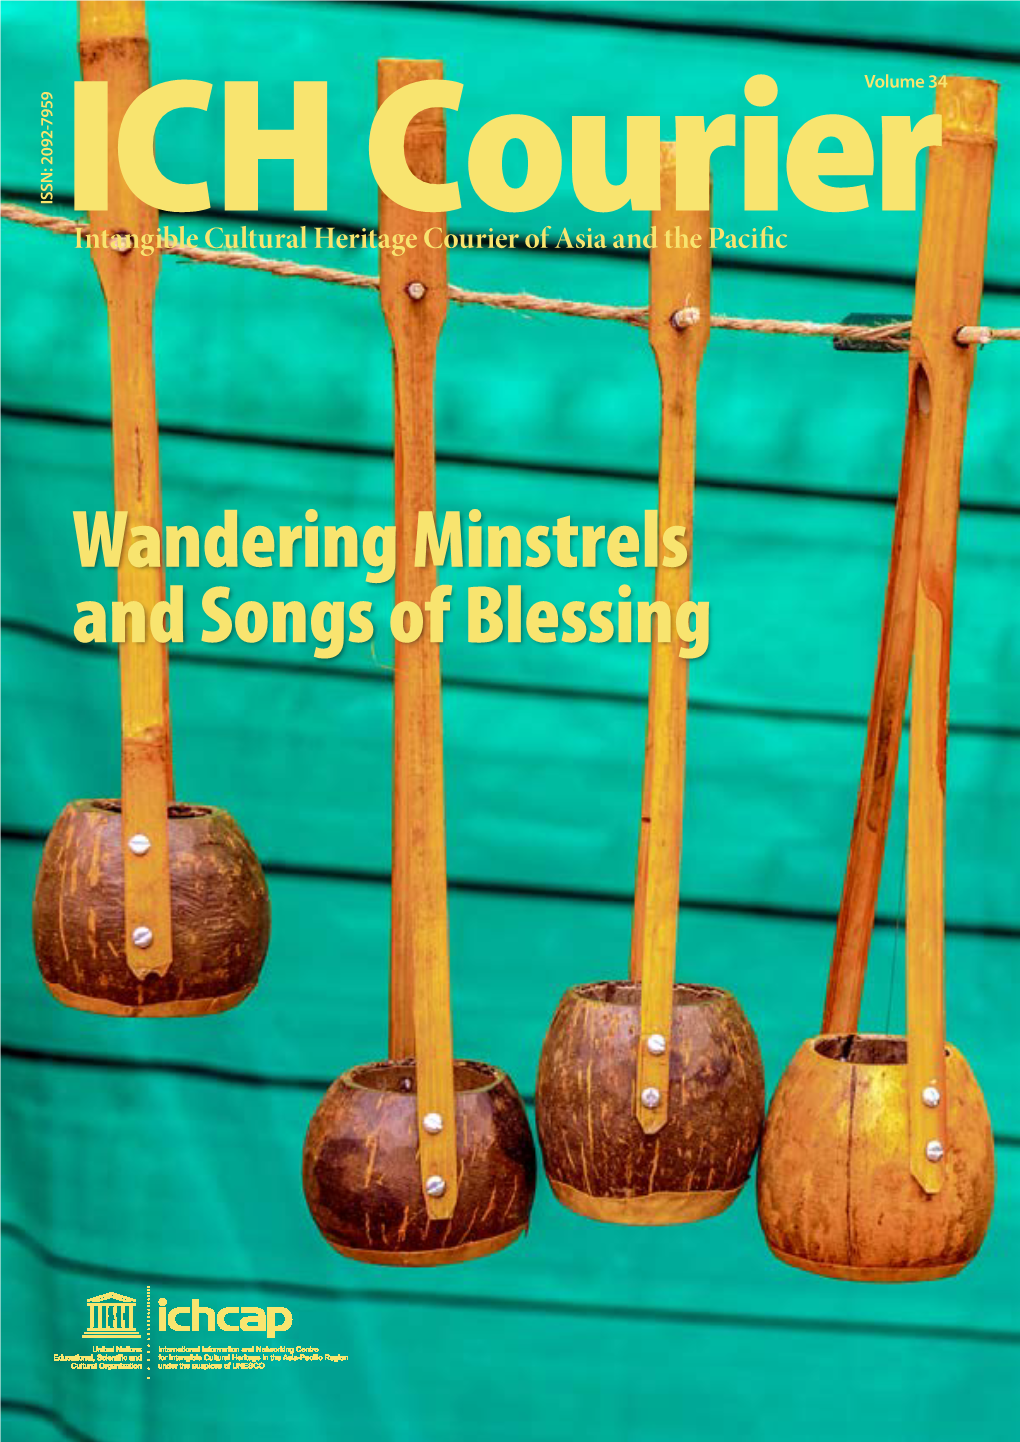 Wandering Minstrels and Songs of Blessing Contents Editorial Remarks Volume 34 Kwon Huh Director-General of ICHCAP